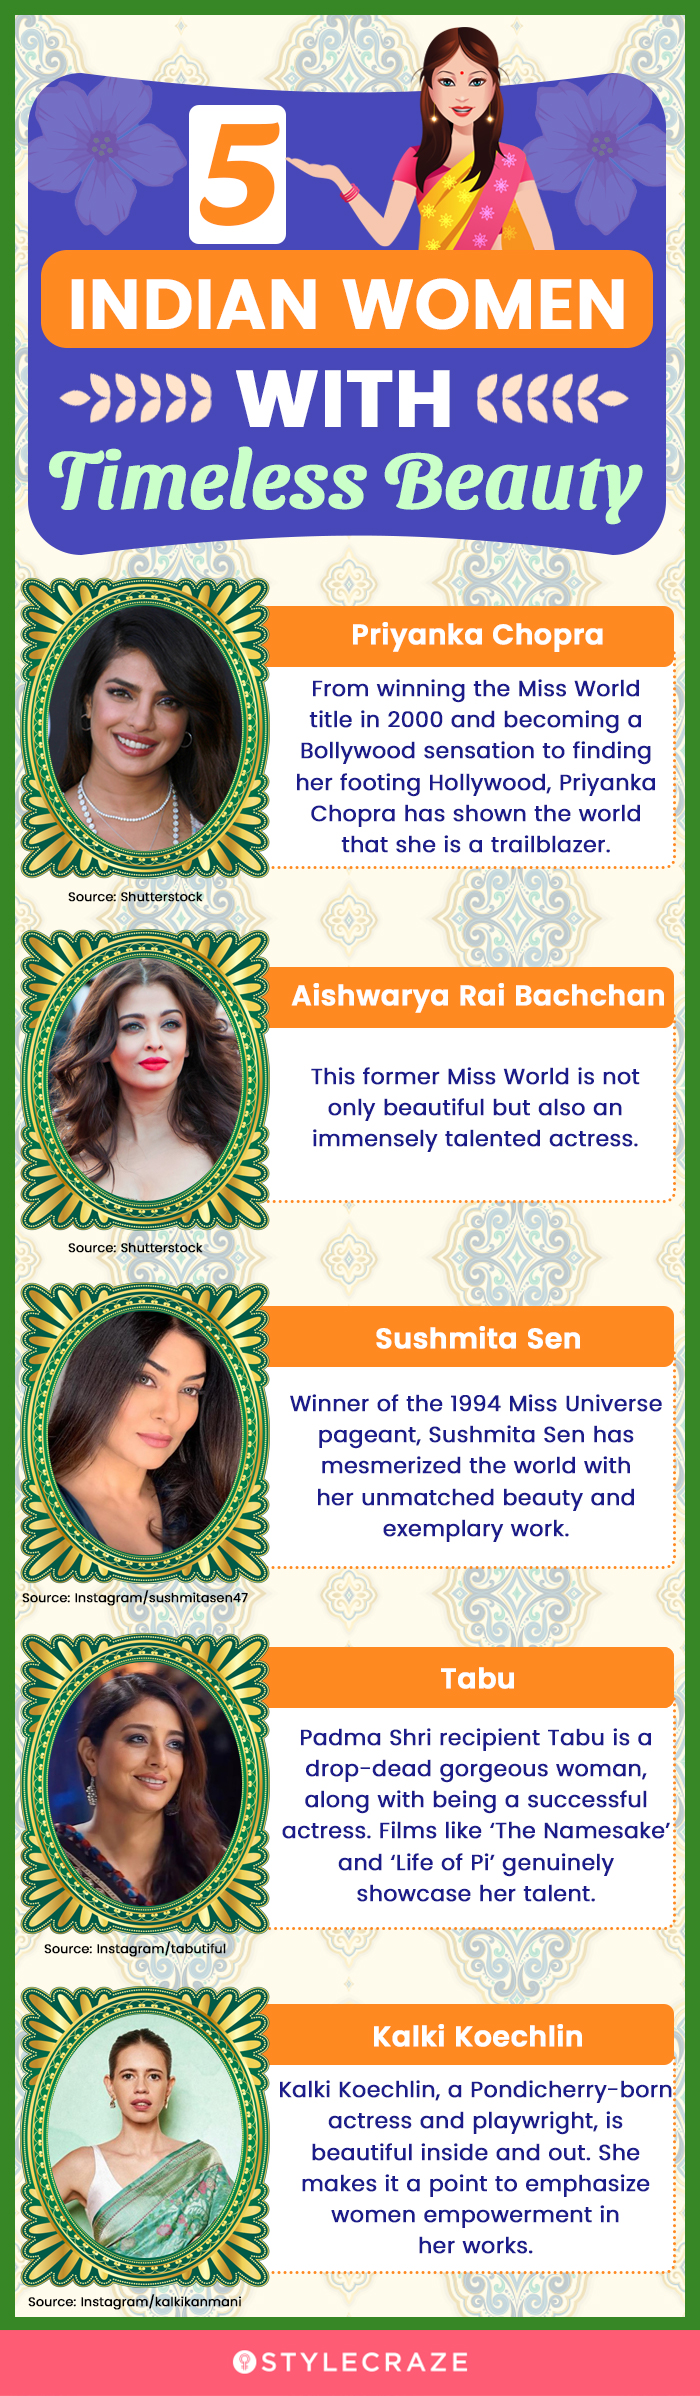 5 indian women with timeless beauty (infographic)